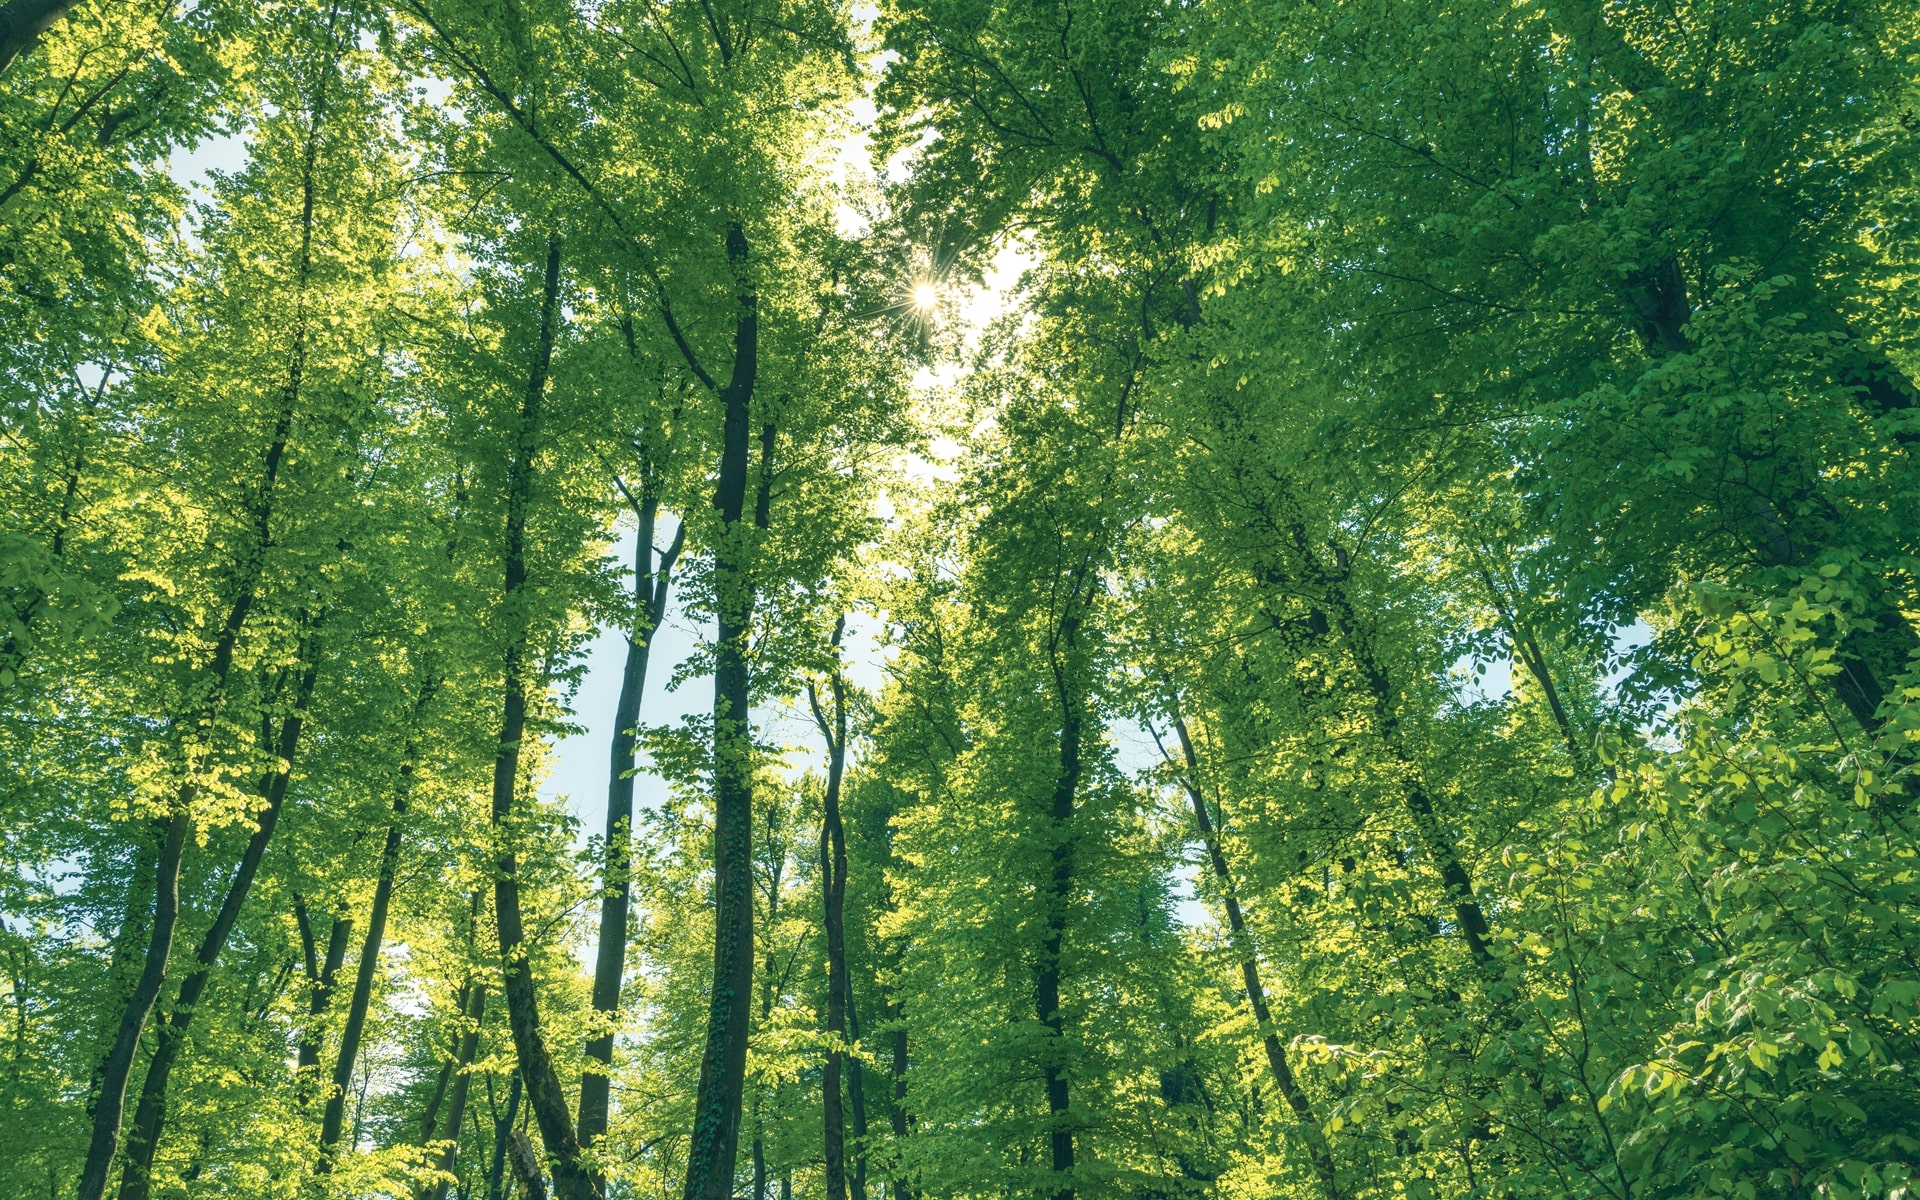 Natural Forest Regrowth May Be the Best Method to Combat Climate Change